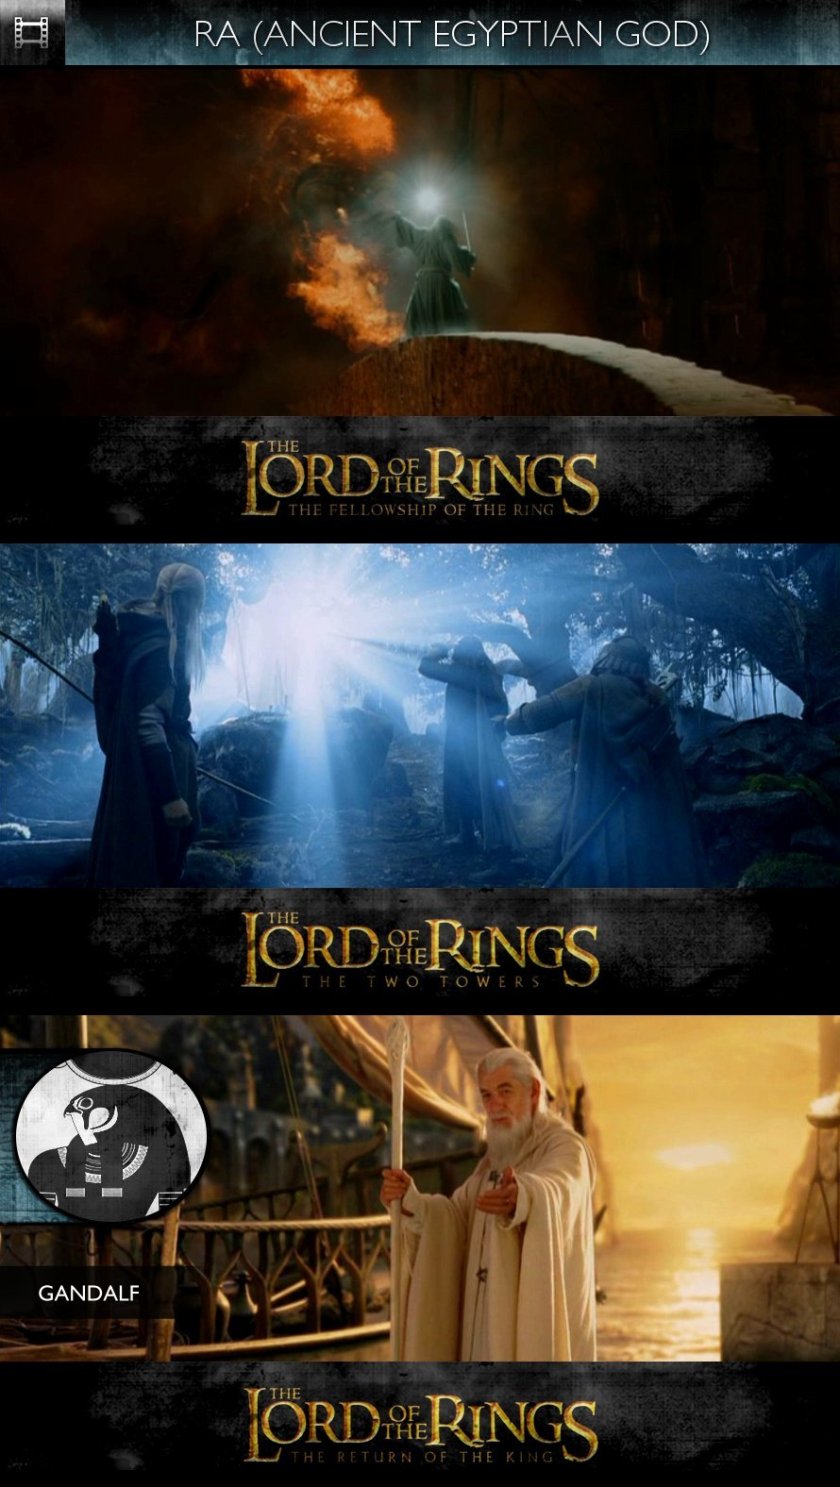 RA - The Lord Of The Rings (2001-2003) - Gandalf